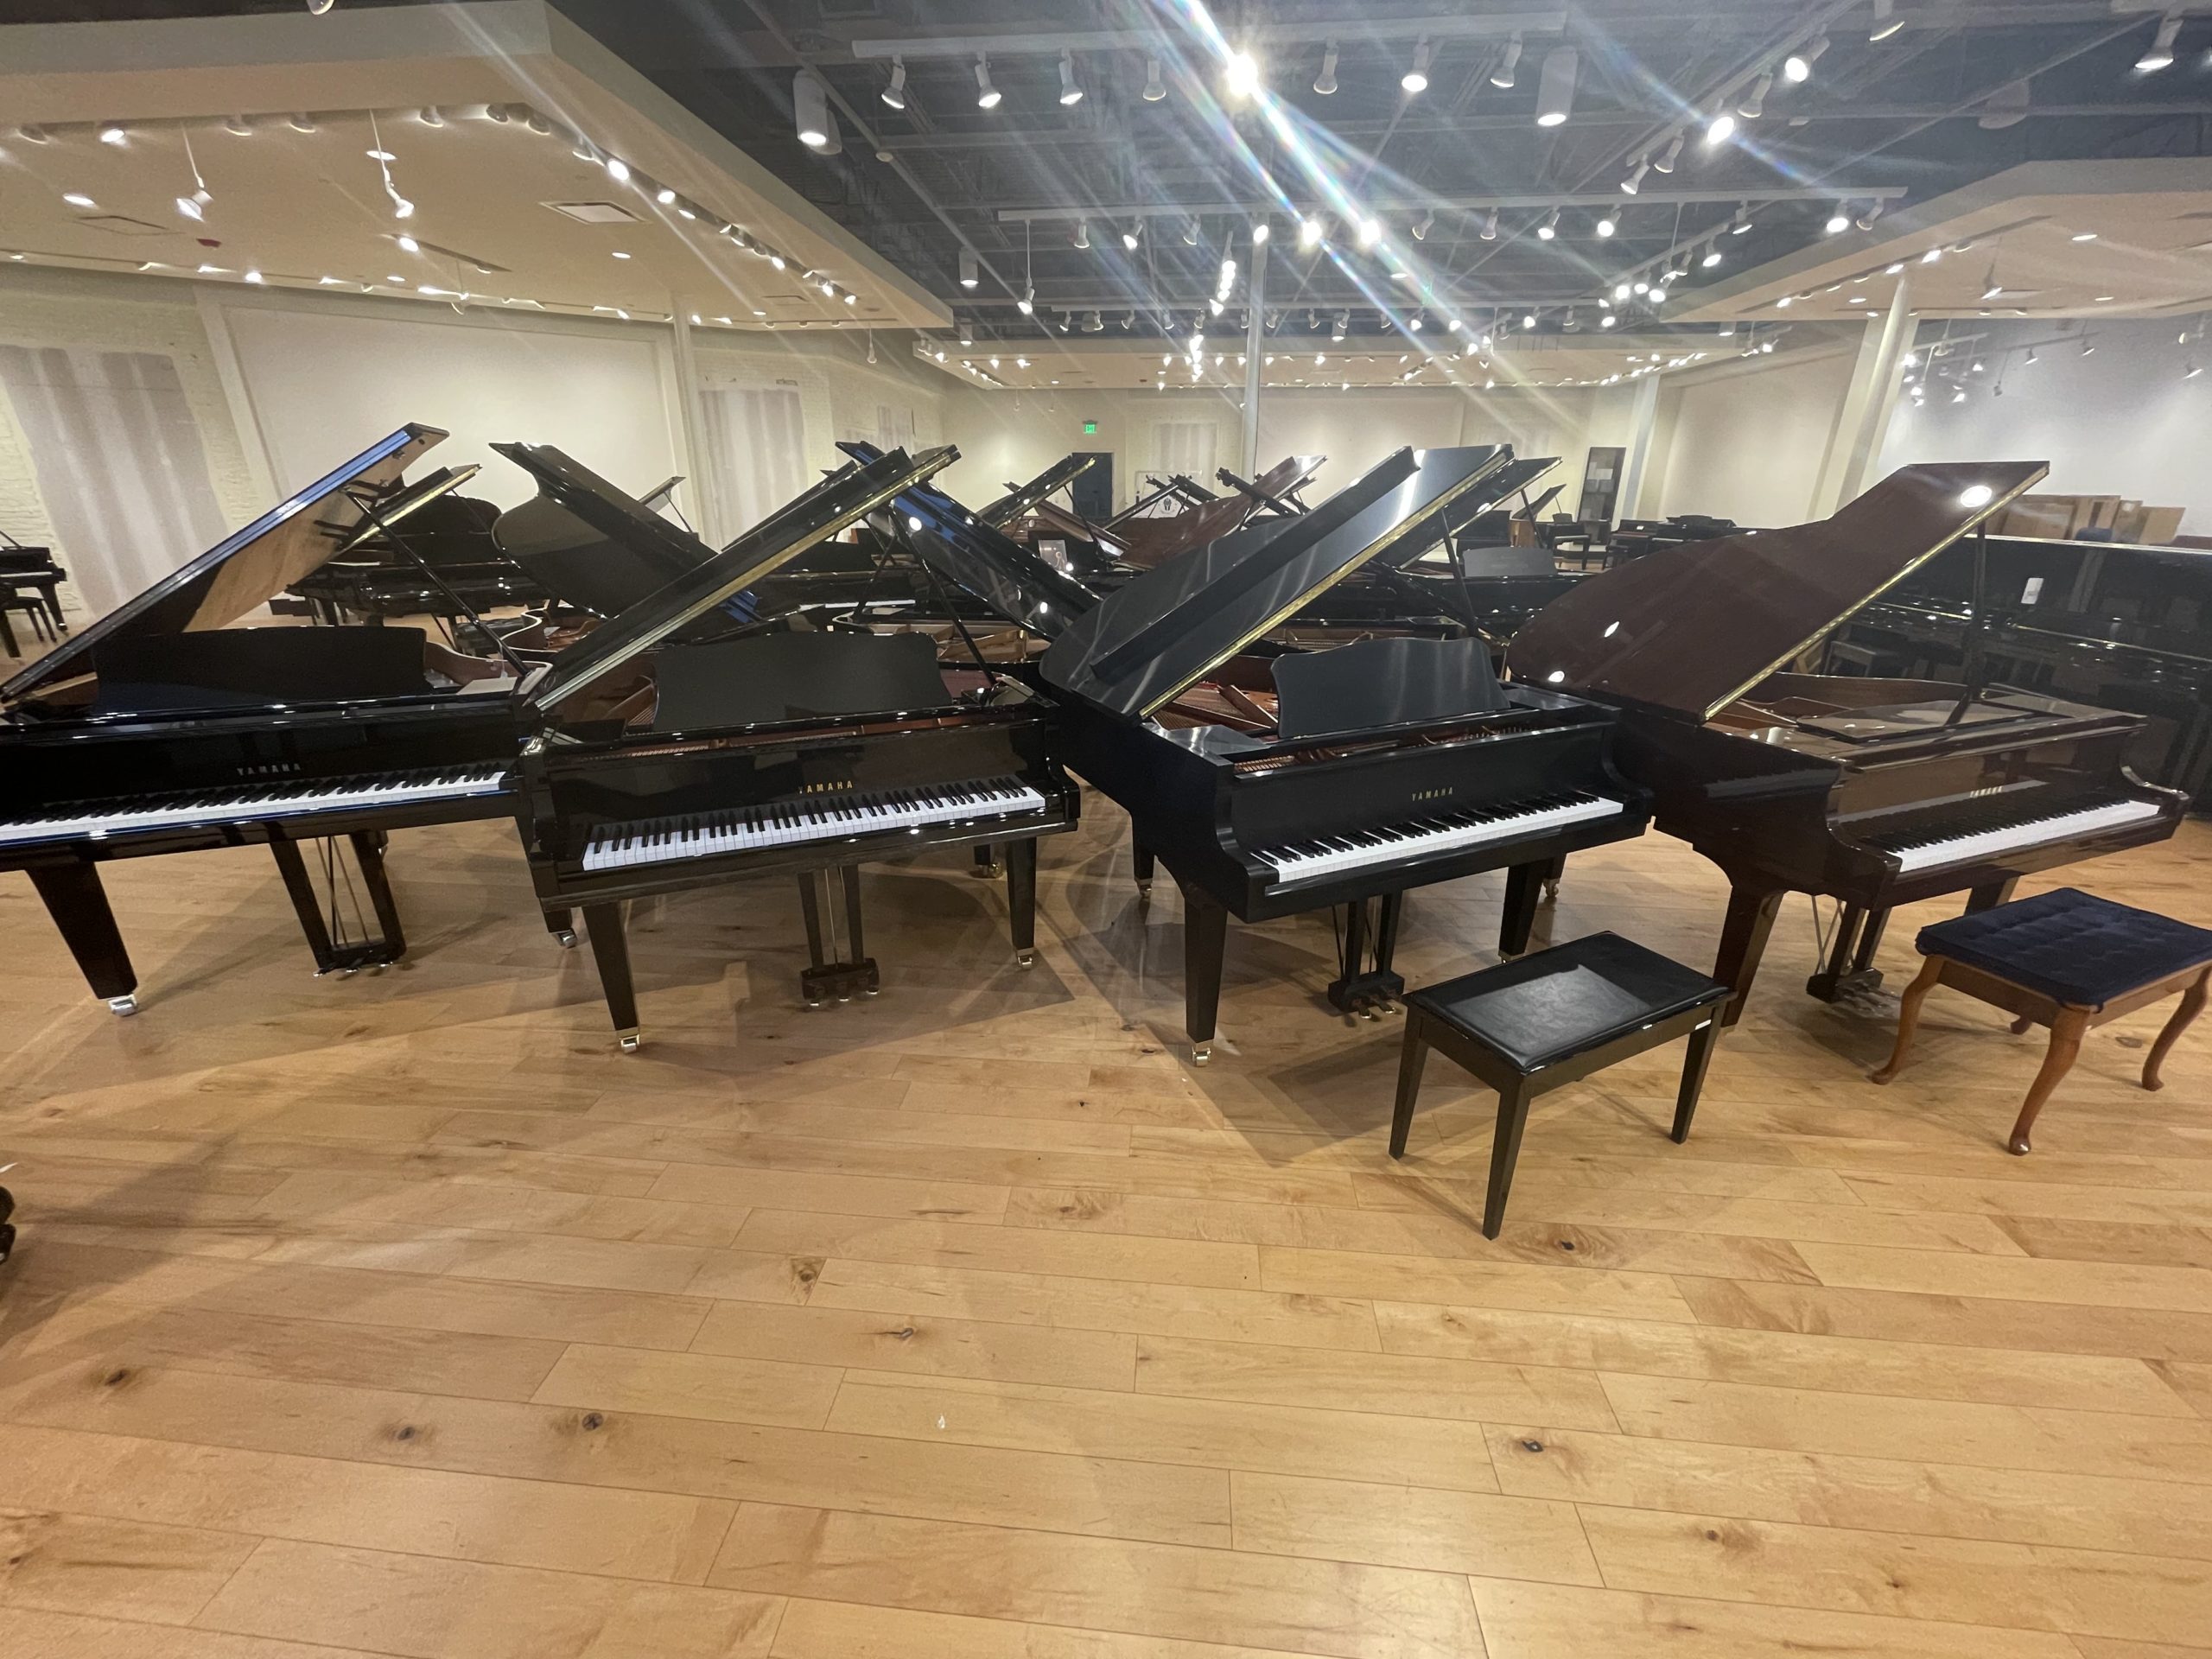 Solich Piano of Columbus | 4194 Easton Gateway Dr Columbus, OH 43219 | Exclusive Yamaha Piano Dealer For Ohio